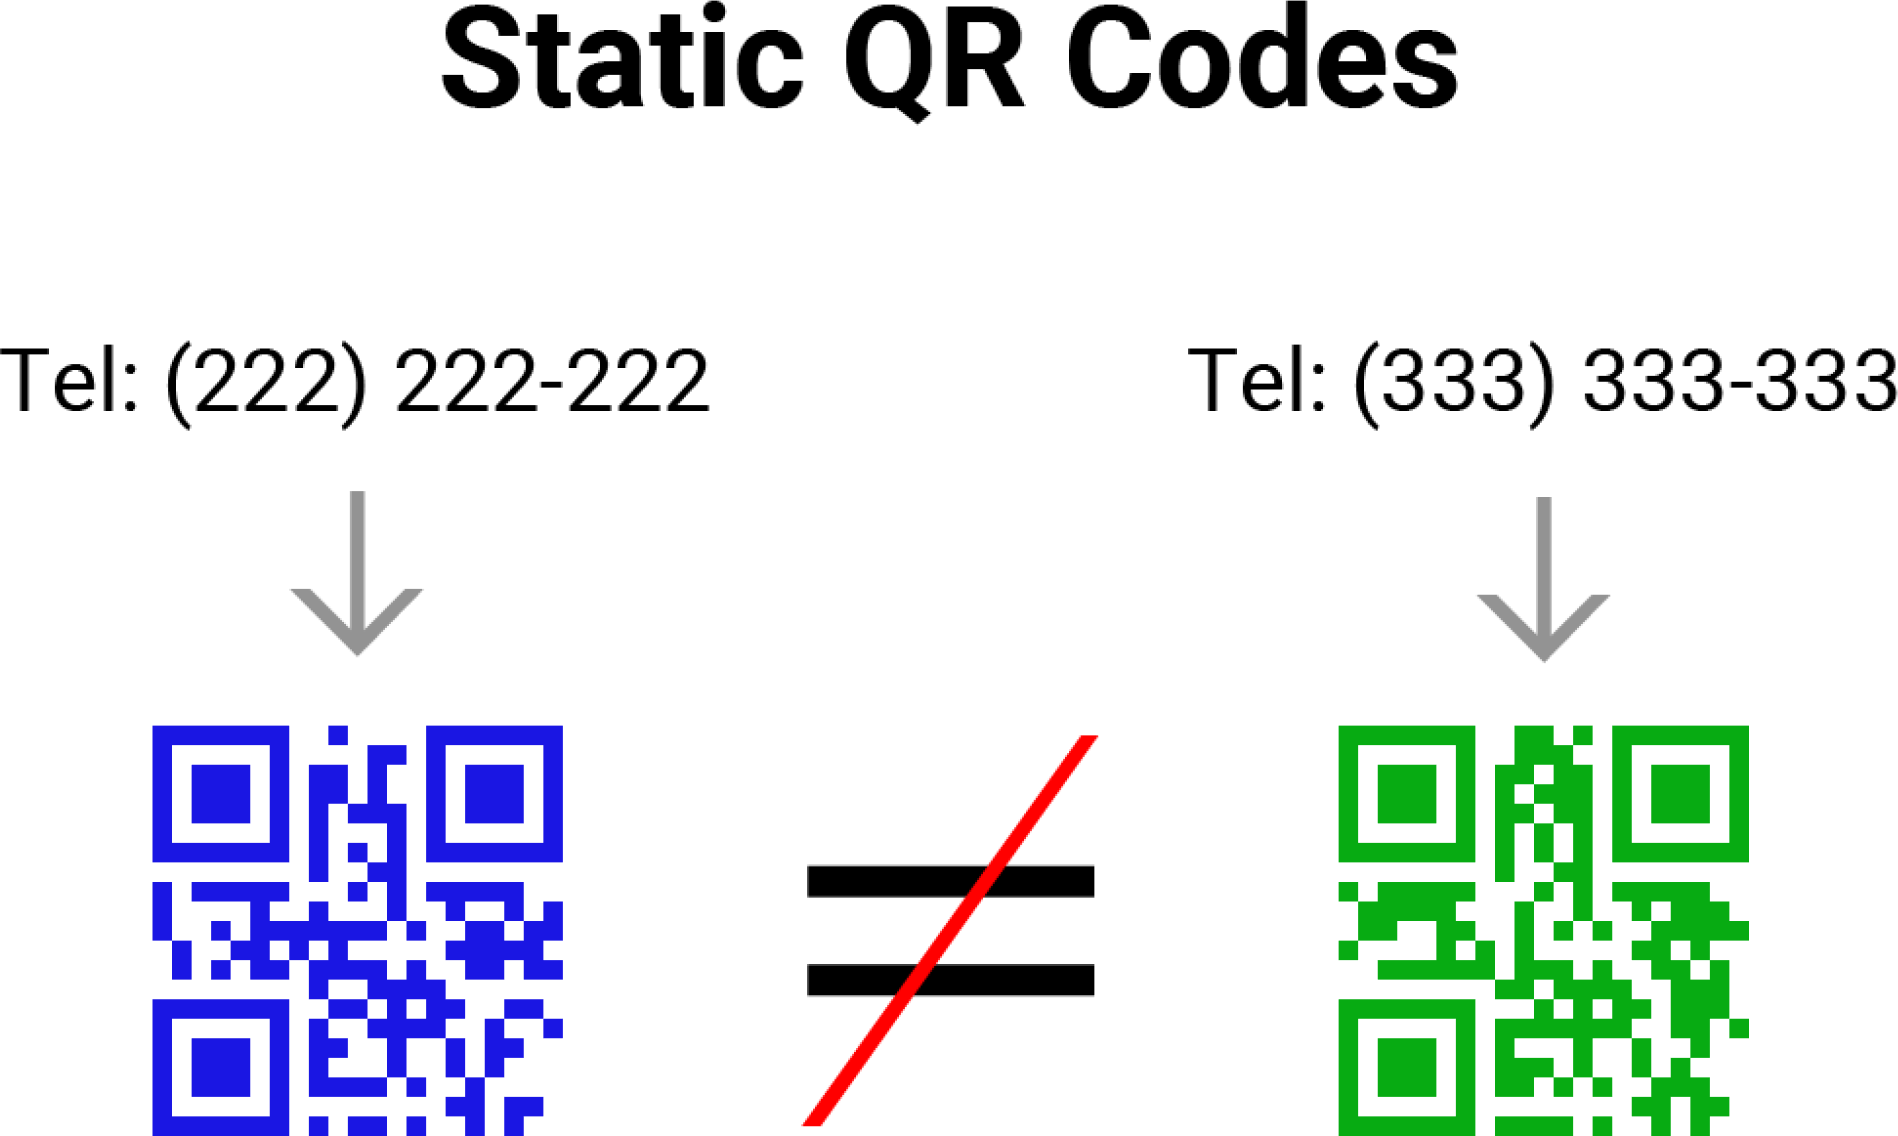 An infographic showing how static QR codes work.